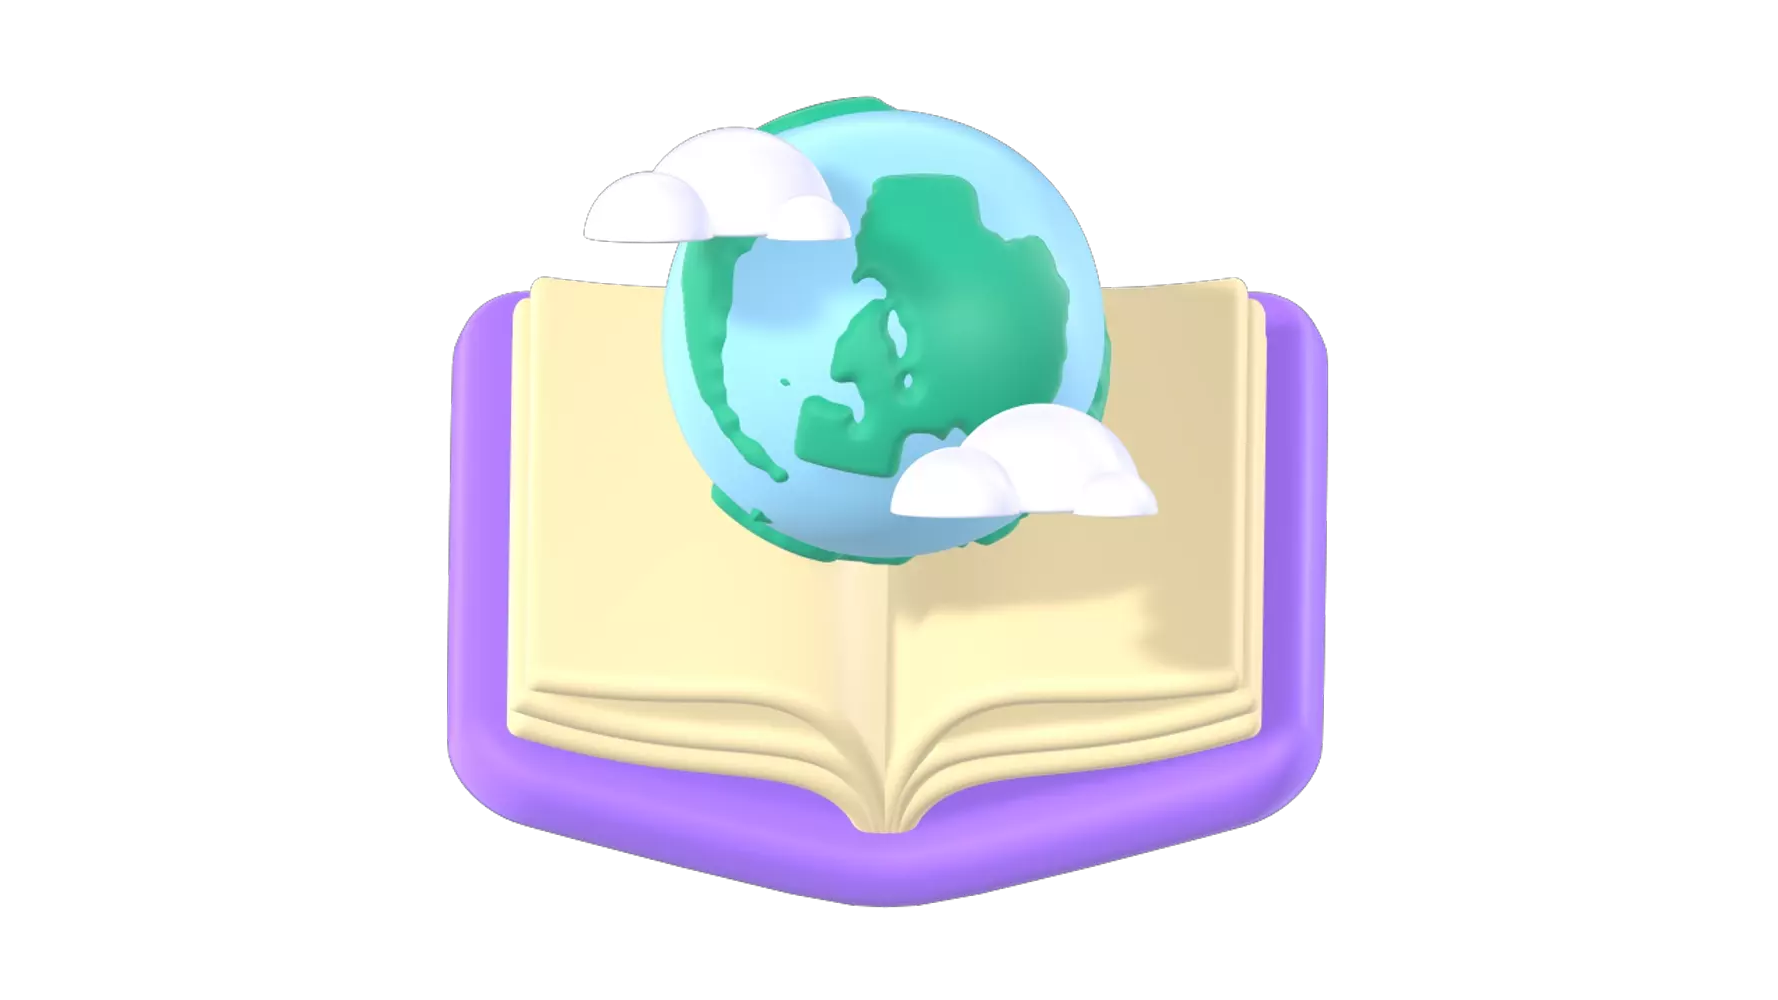 Open Book 3D Graphic